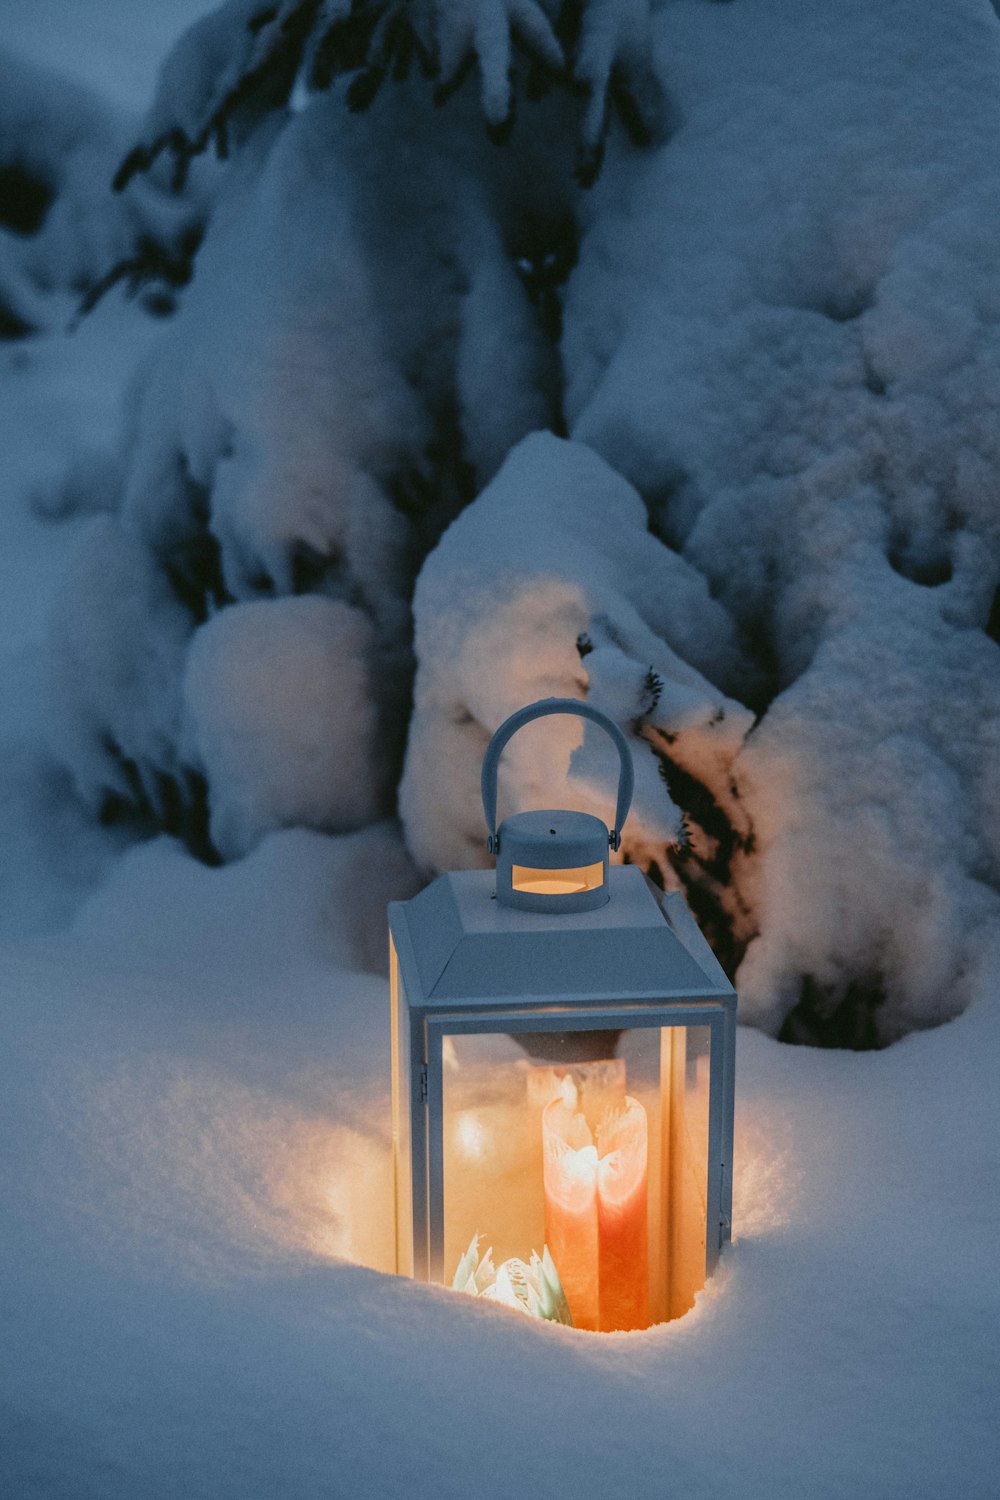 a lantern in the middle of a snowy field